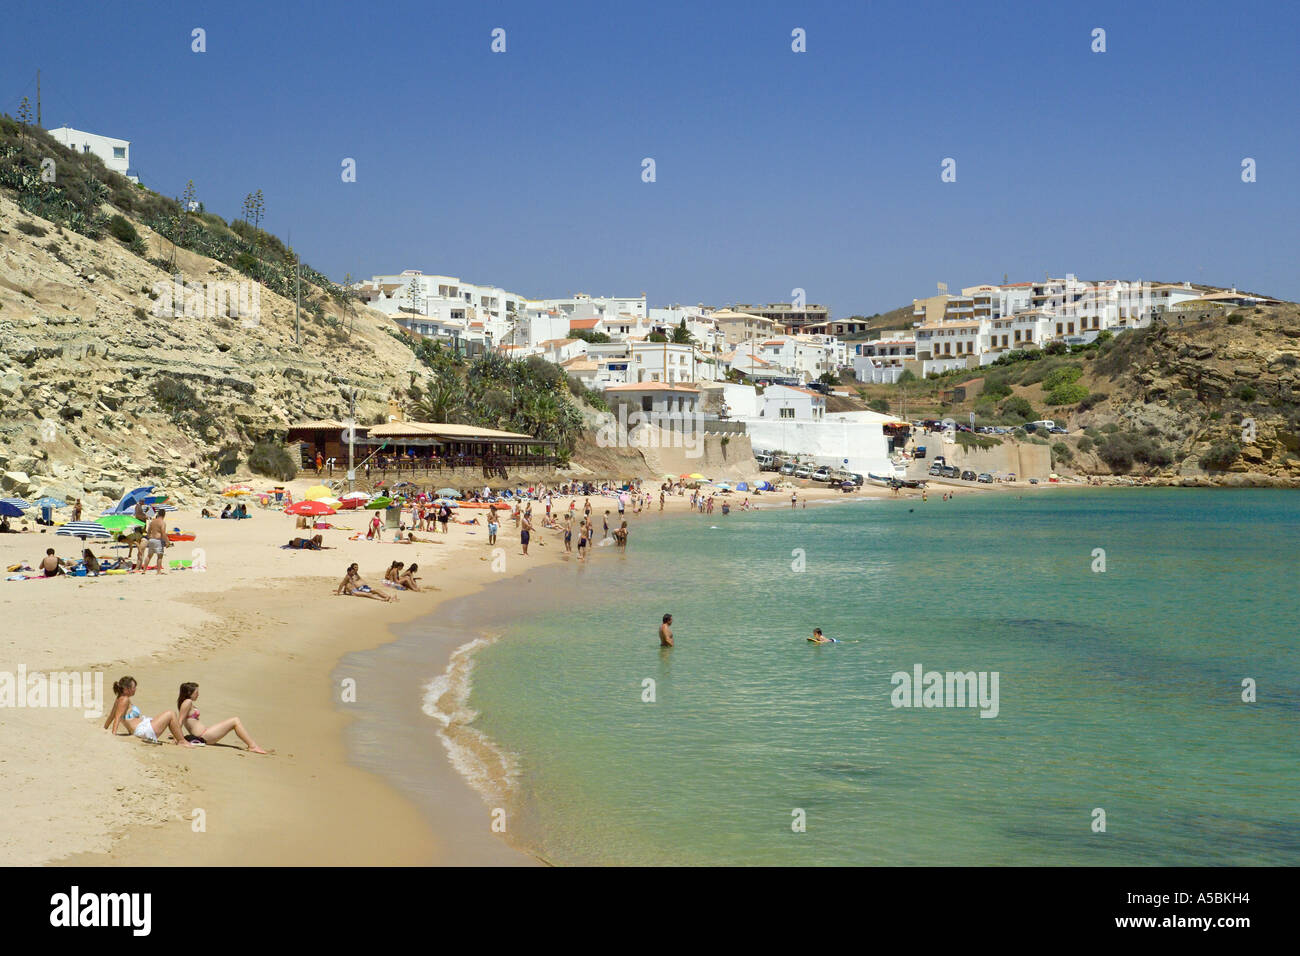 Beach Restaurant Tourists Sunbathing High Resolution Stock Photography and  Images - Alamy